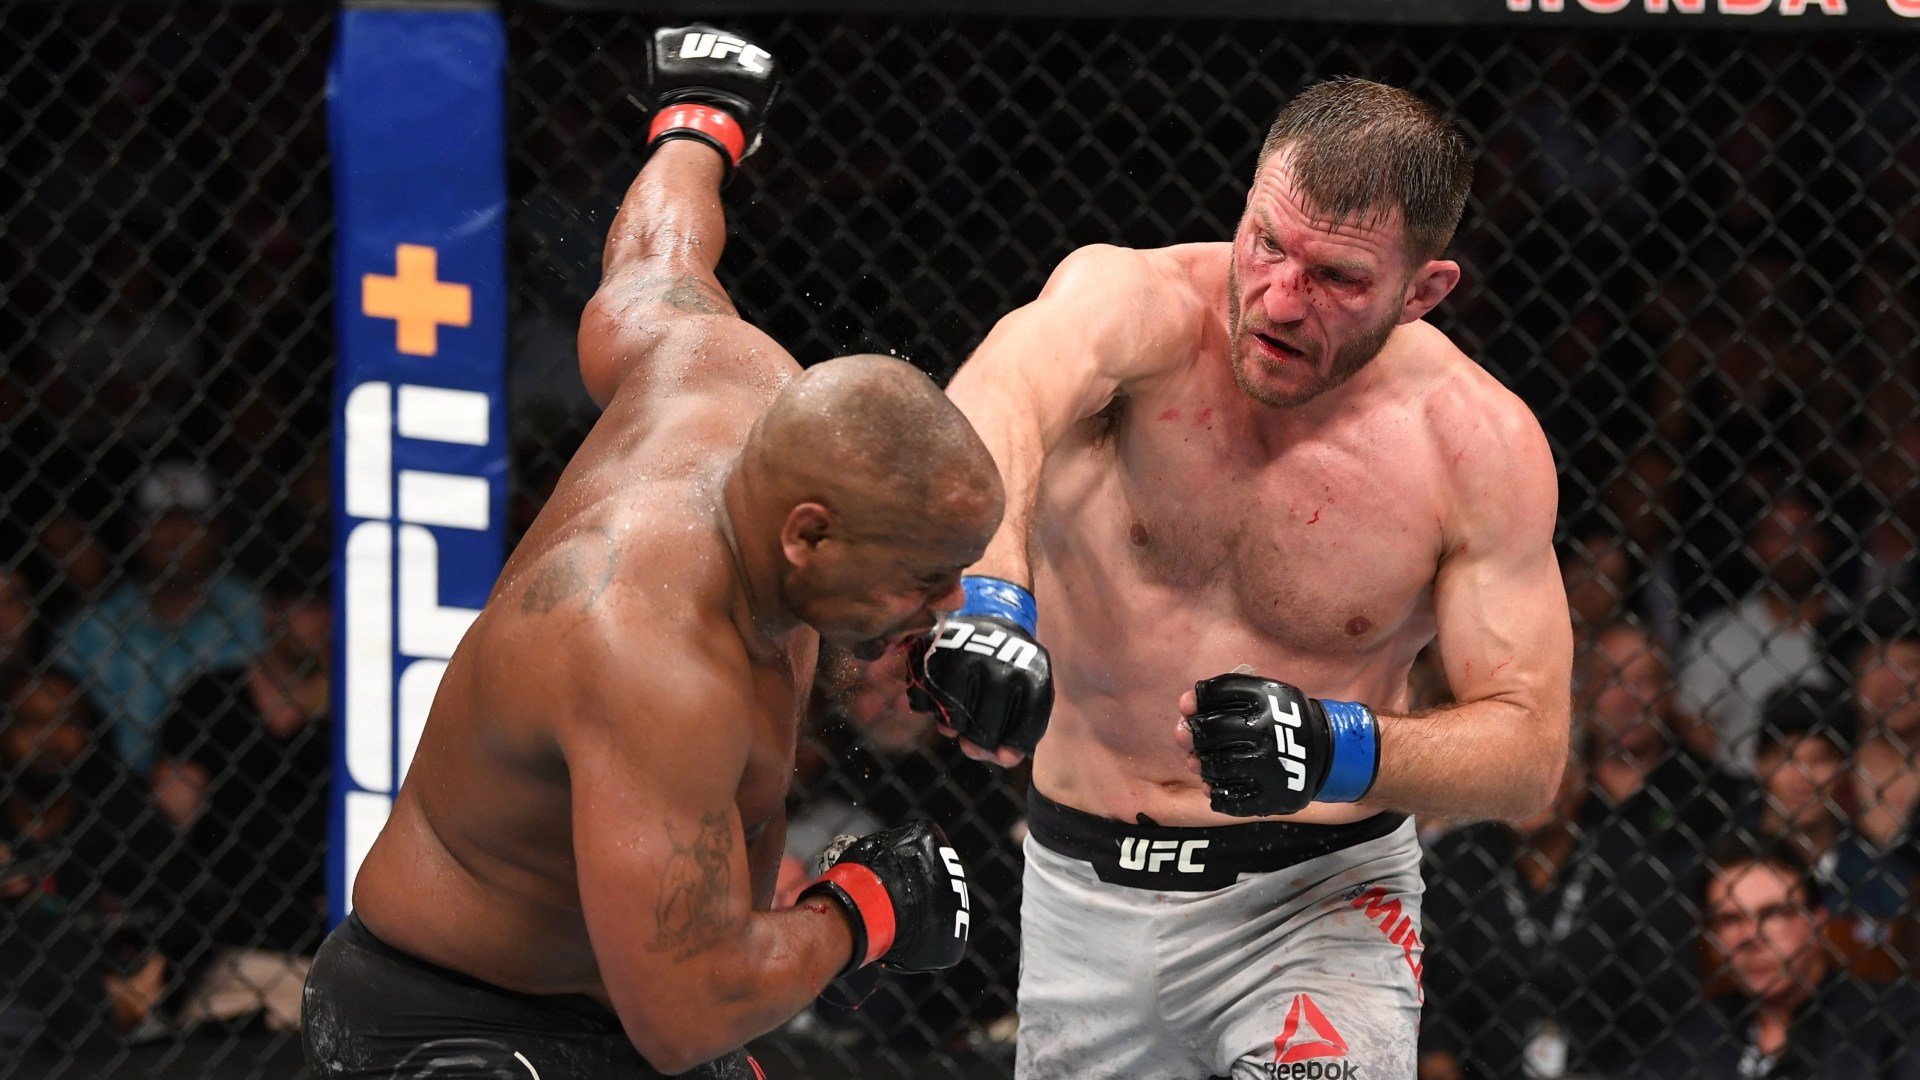 When is UFC 252? Date, location, start time, how to watch Cormier vs Miocic 3